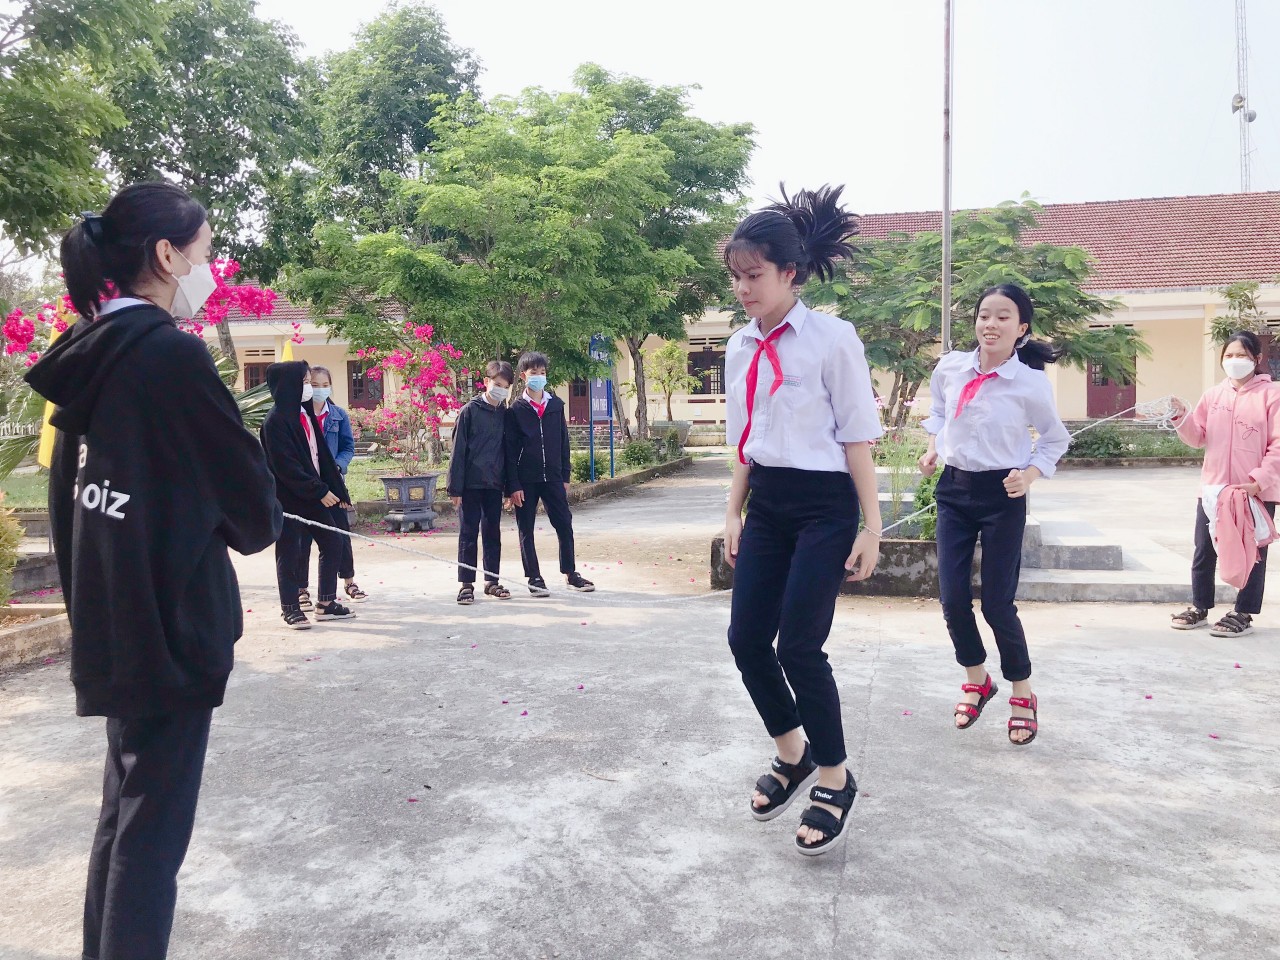 students are play jump road